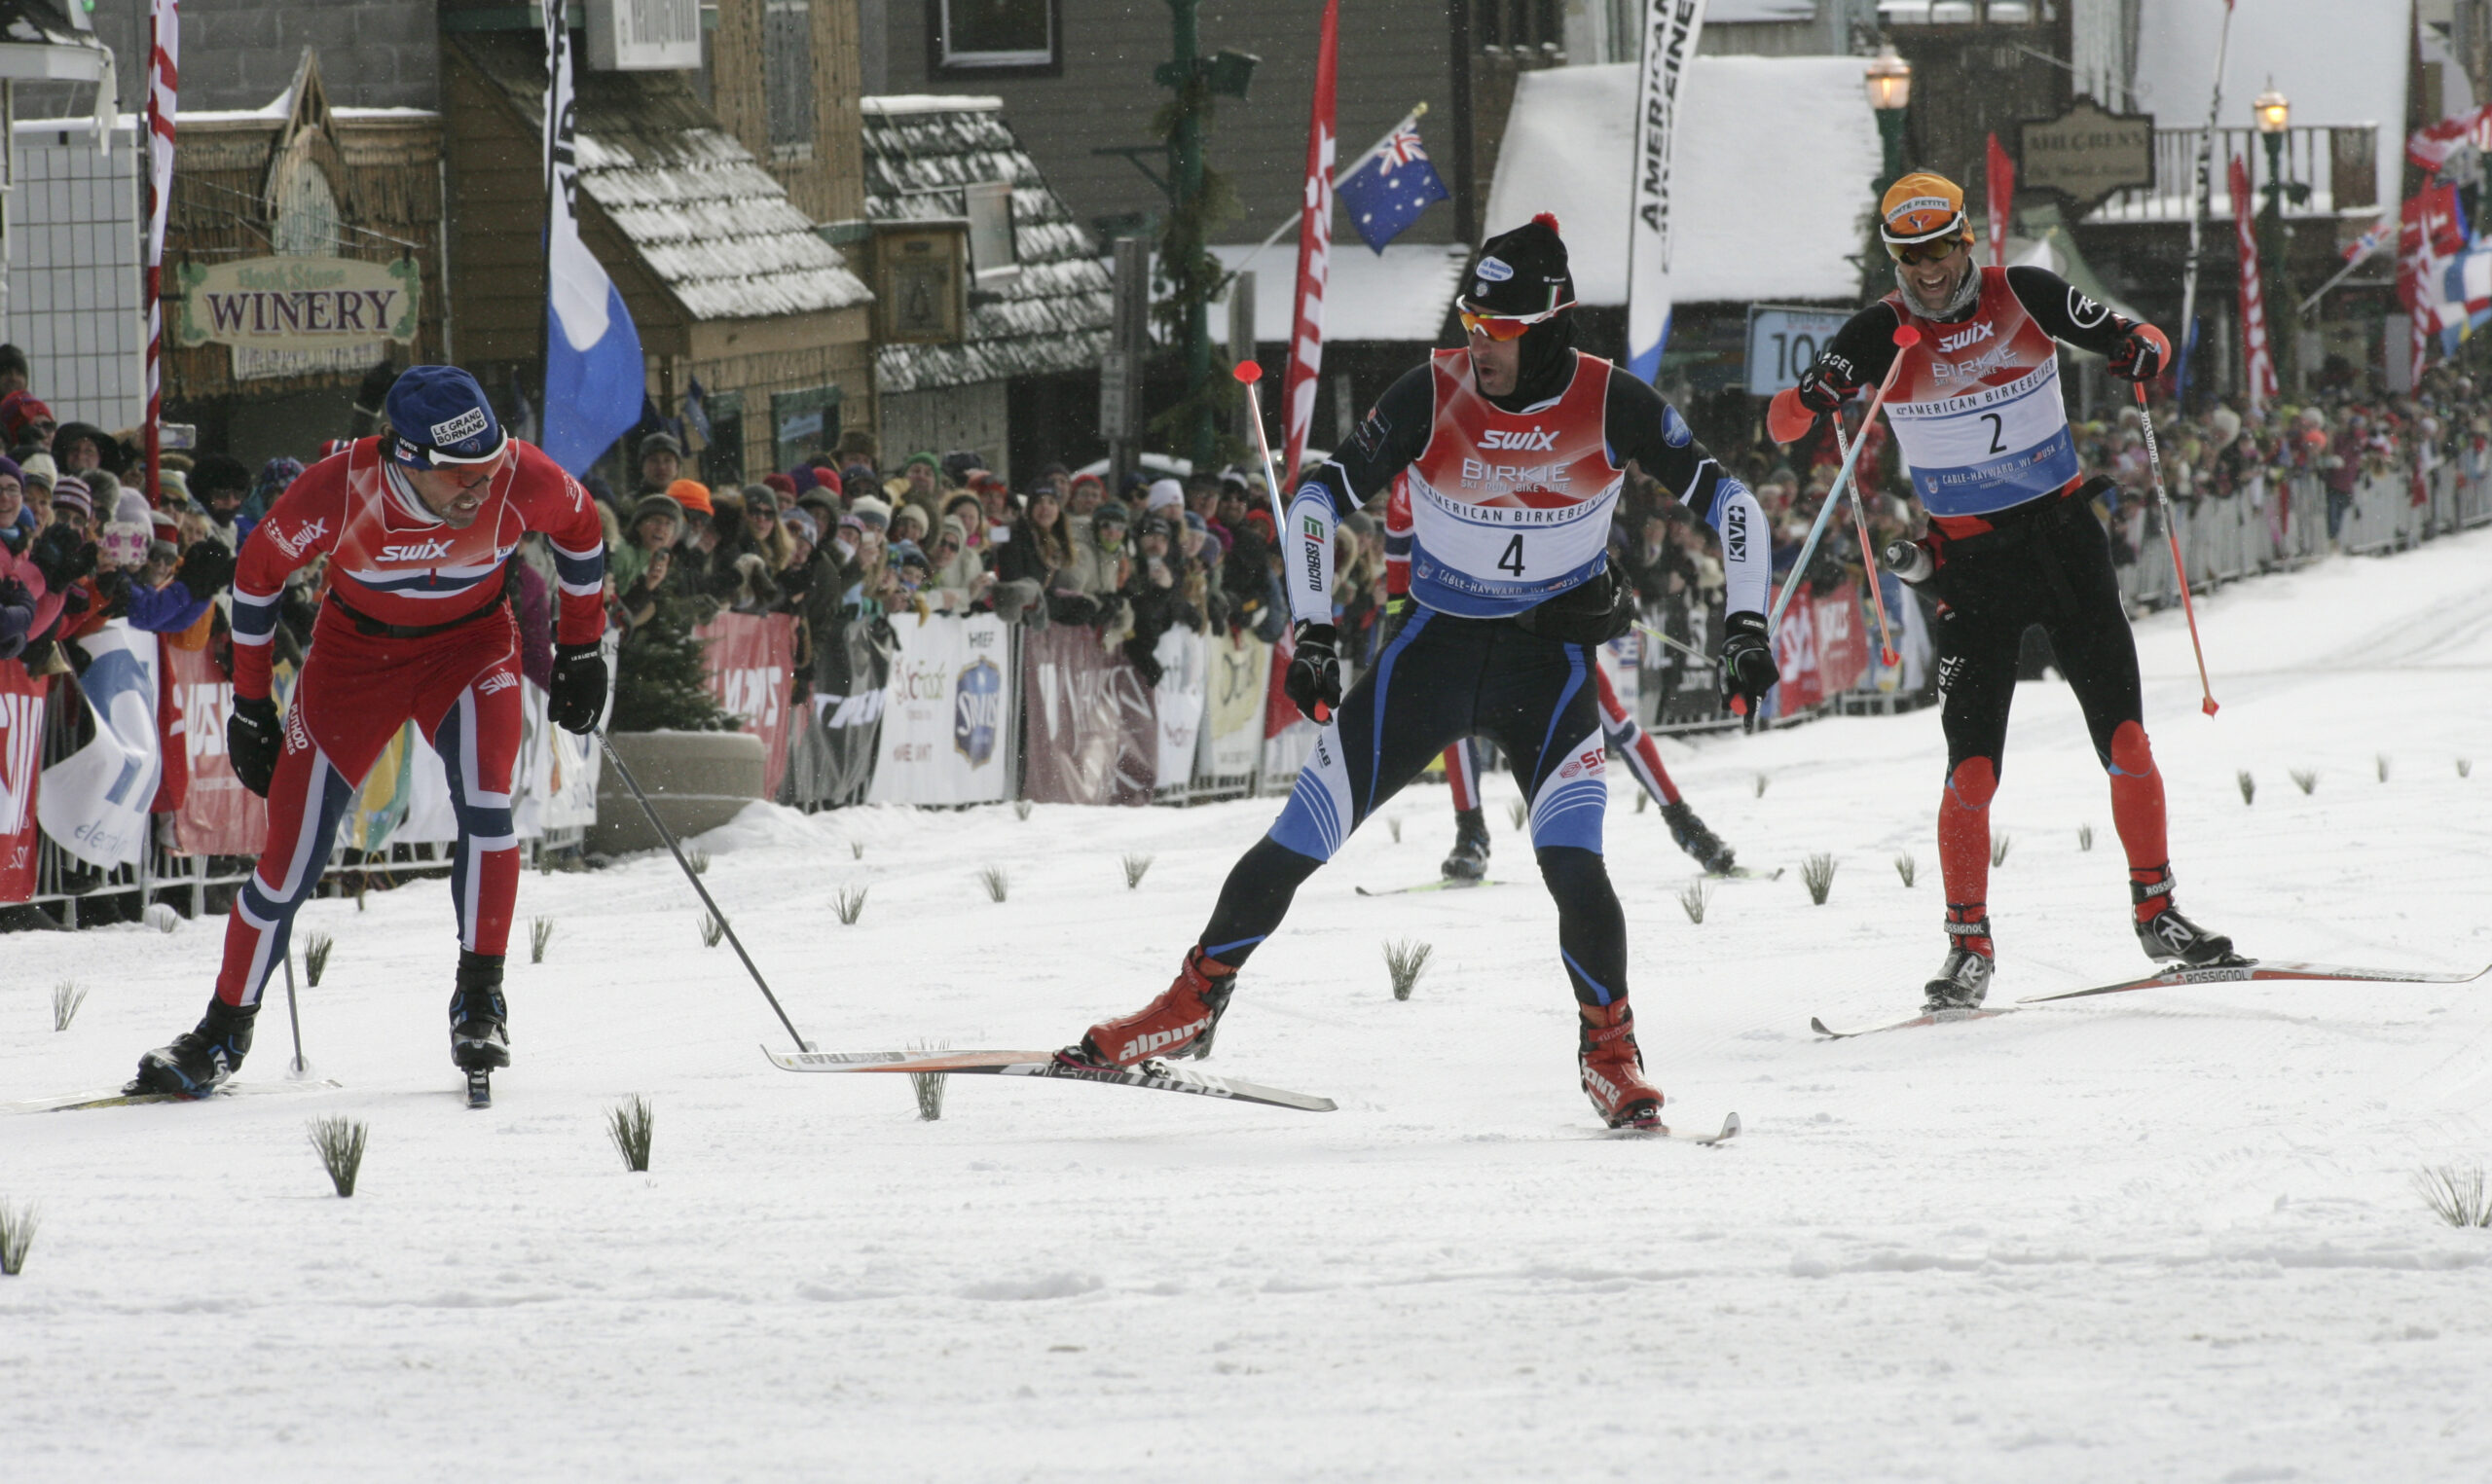 ‘Fantastic’ Trail Conditions For American Birkebeiner, Organizer Says